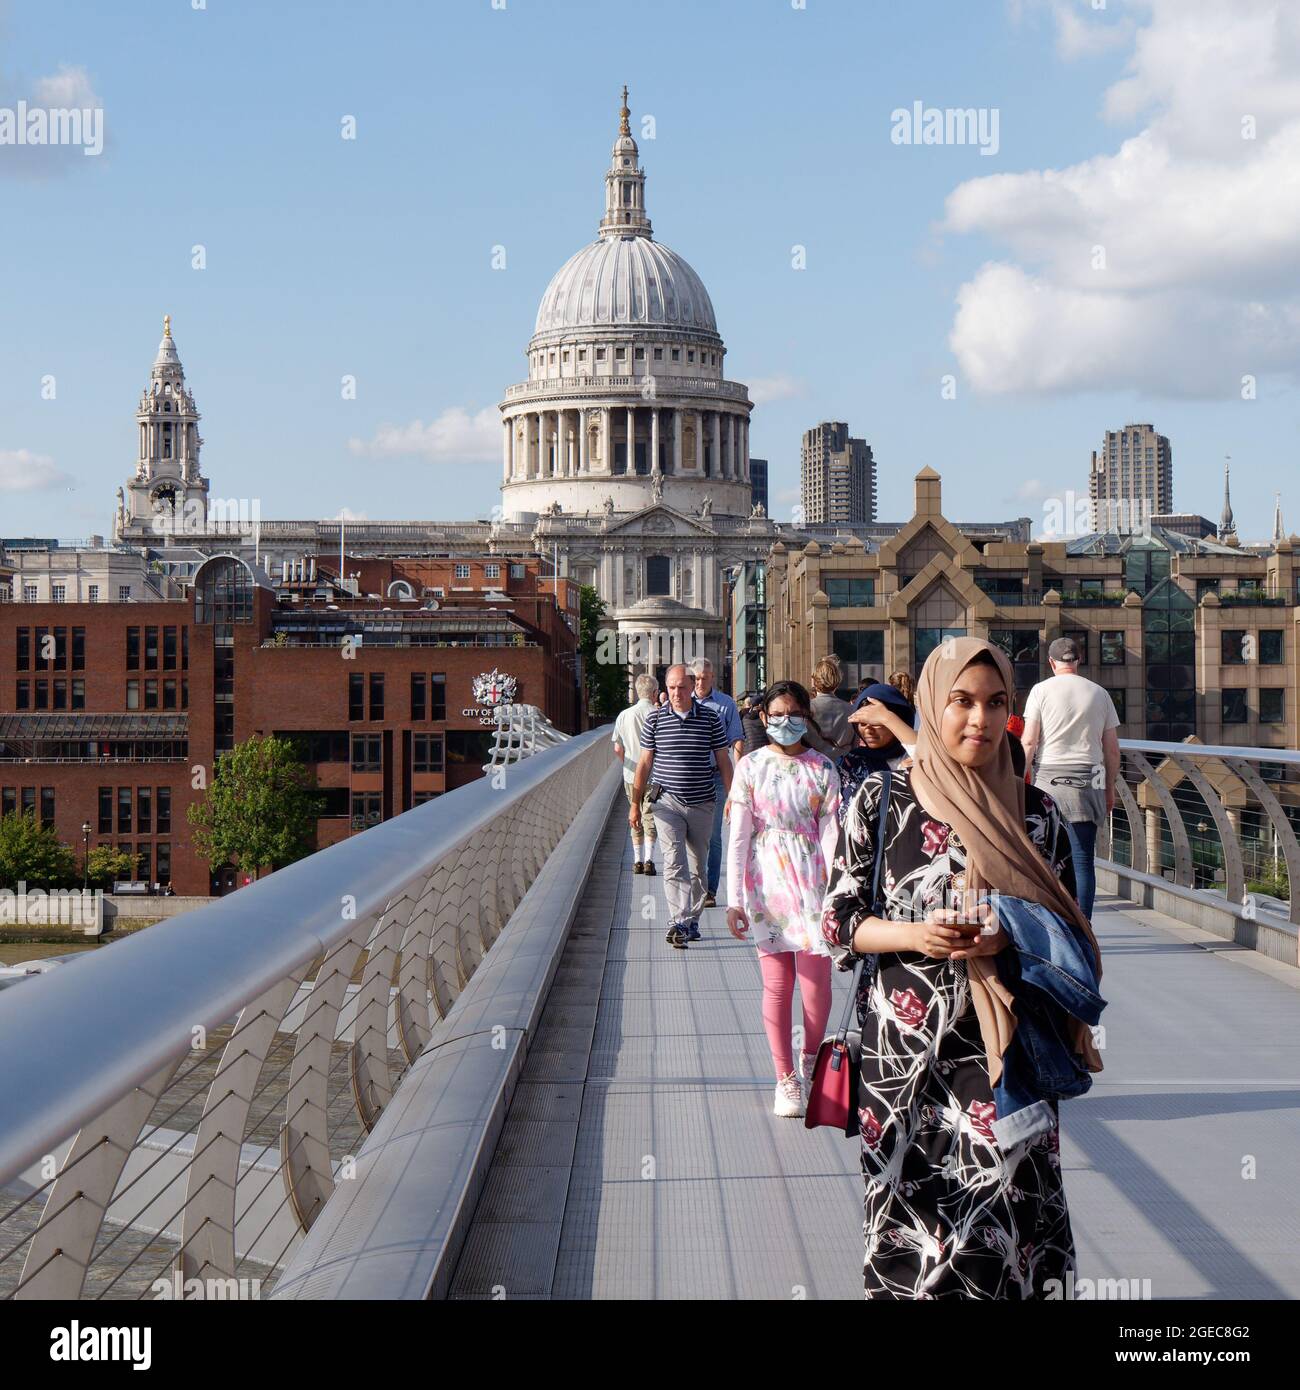 London, Greater London, England, August 10 2021: People of different ethnicities walking on Millennium Bridge with St Pauls Cathedral behind. Stock Photo